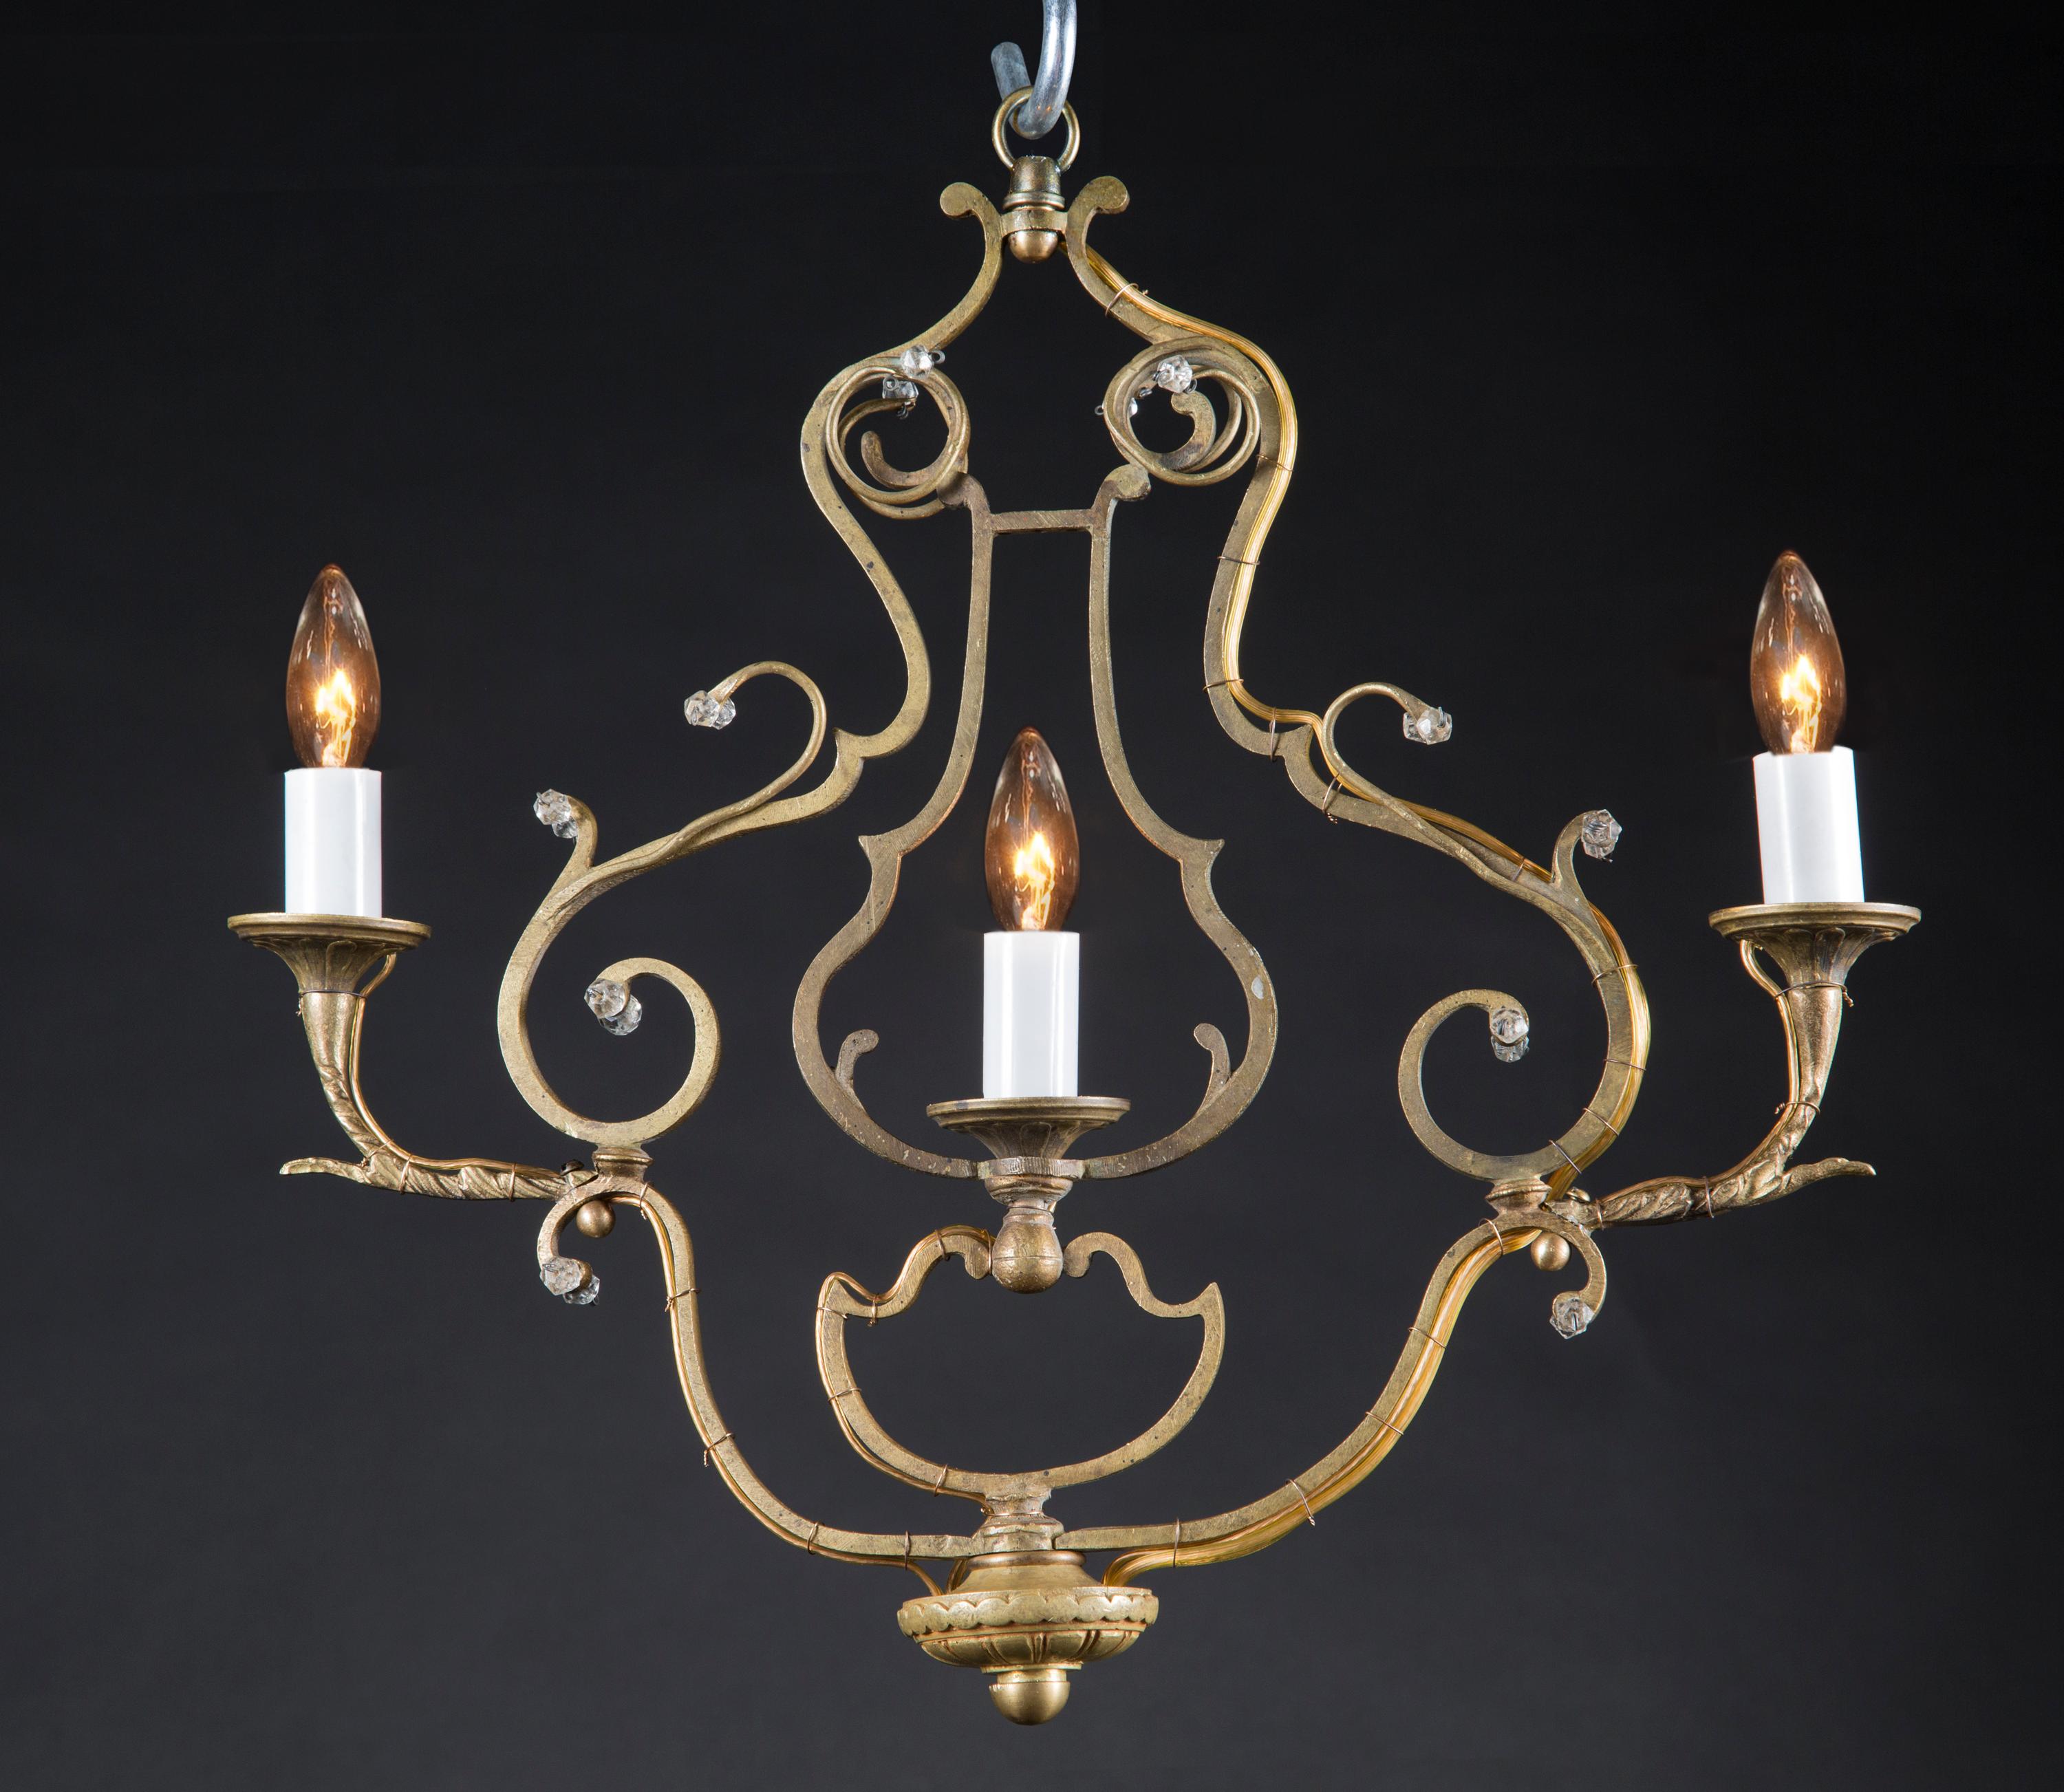 This unusual pair of antique French Louis XV bronze chandeliers feature a linear design perfect for hallways. The three lights sit centrally, two outside and one inside a lyre shaped frame. Slight crystal work is featured on the Louis XV style